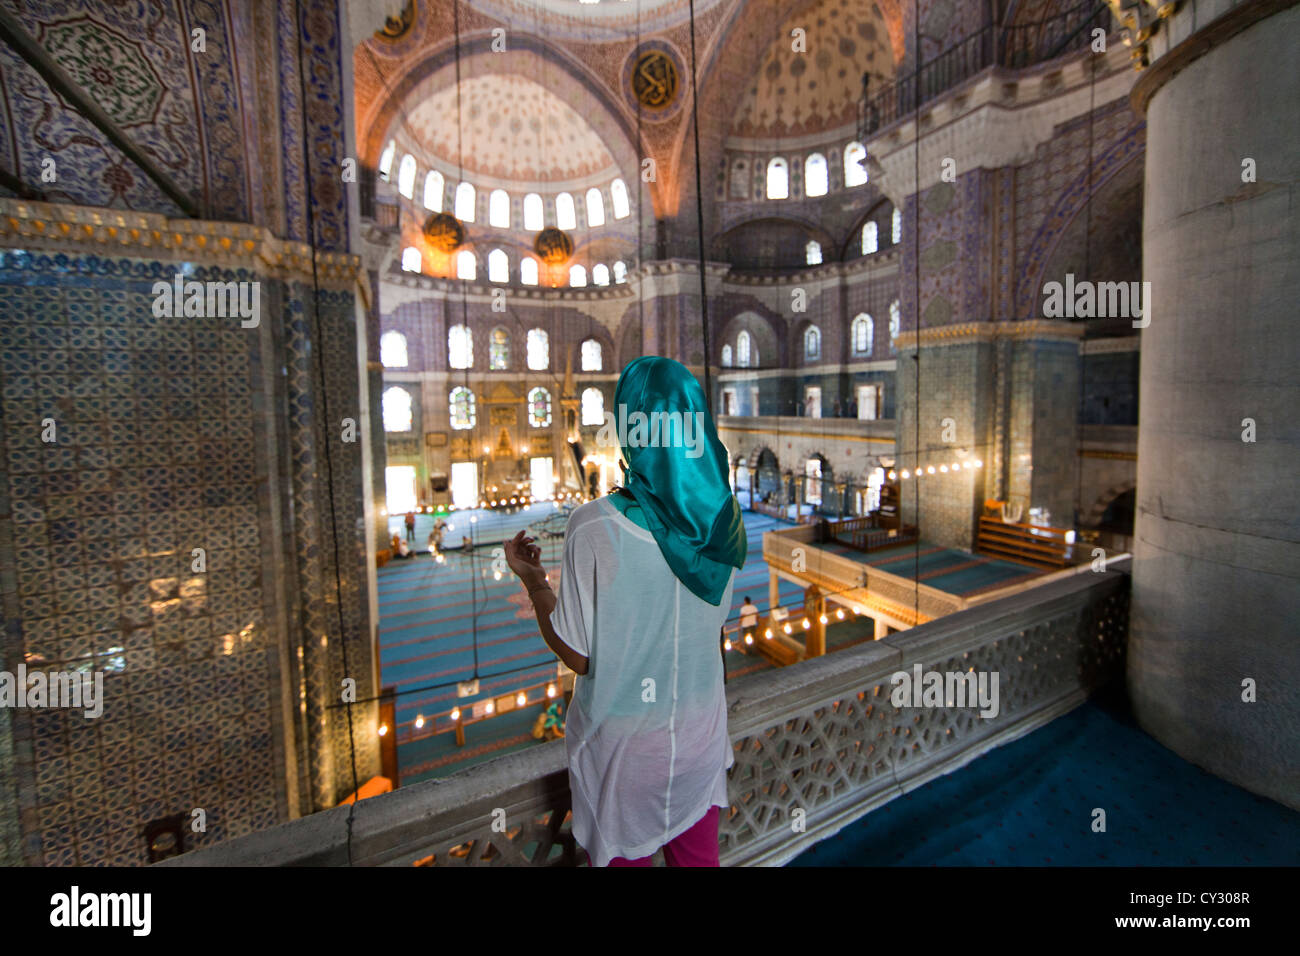 Interior of the Sultan Ahmed (Blue) mosque, Istanbul Stock Photo